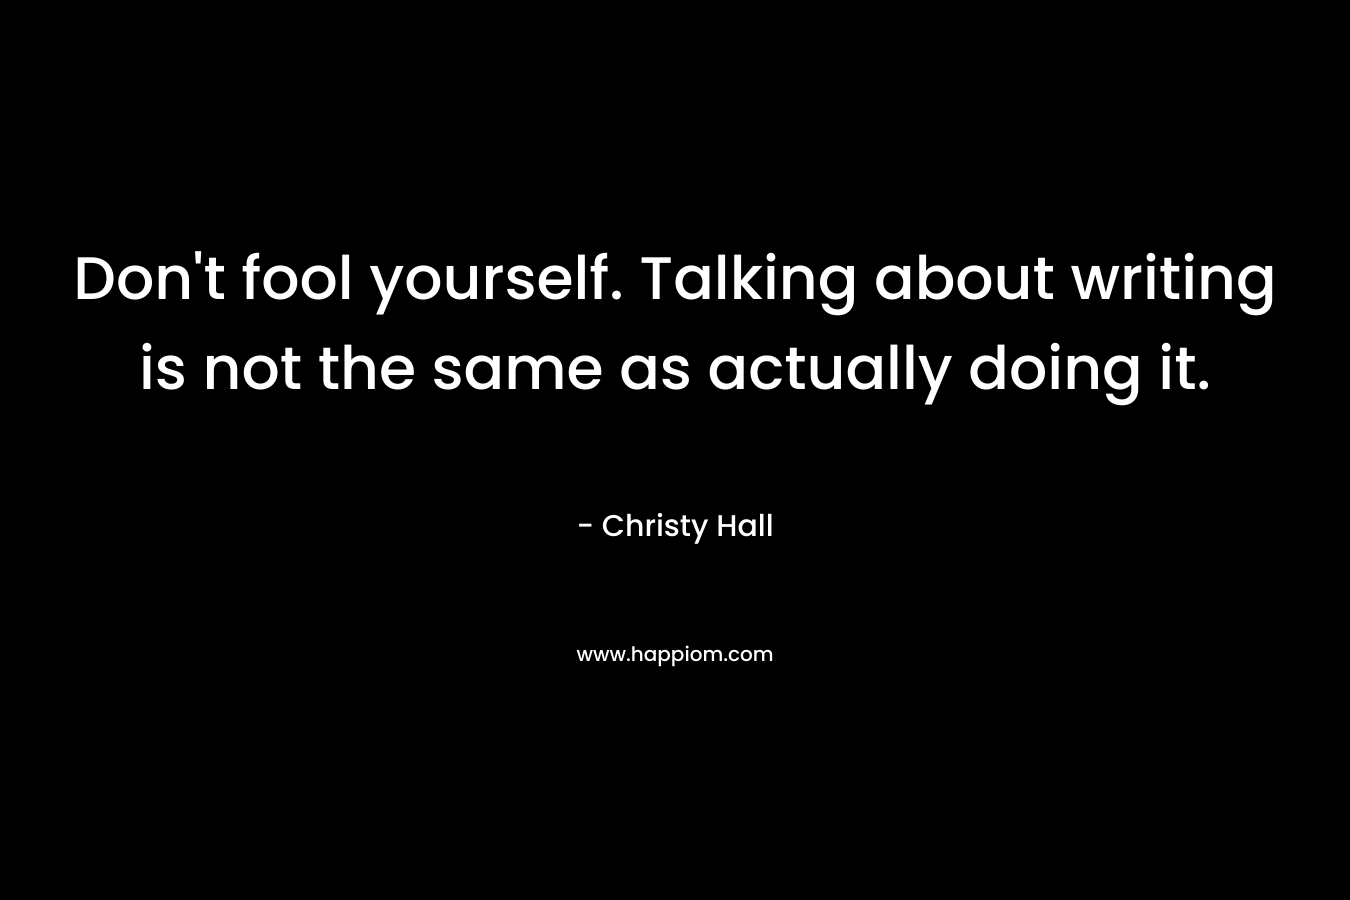 Don't fool yourself. Talking about writing is not the same as actually doing it.